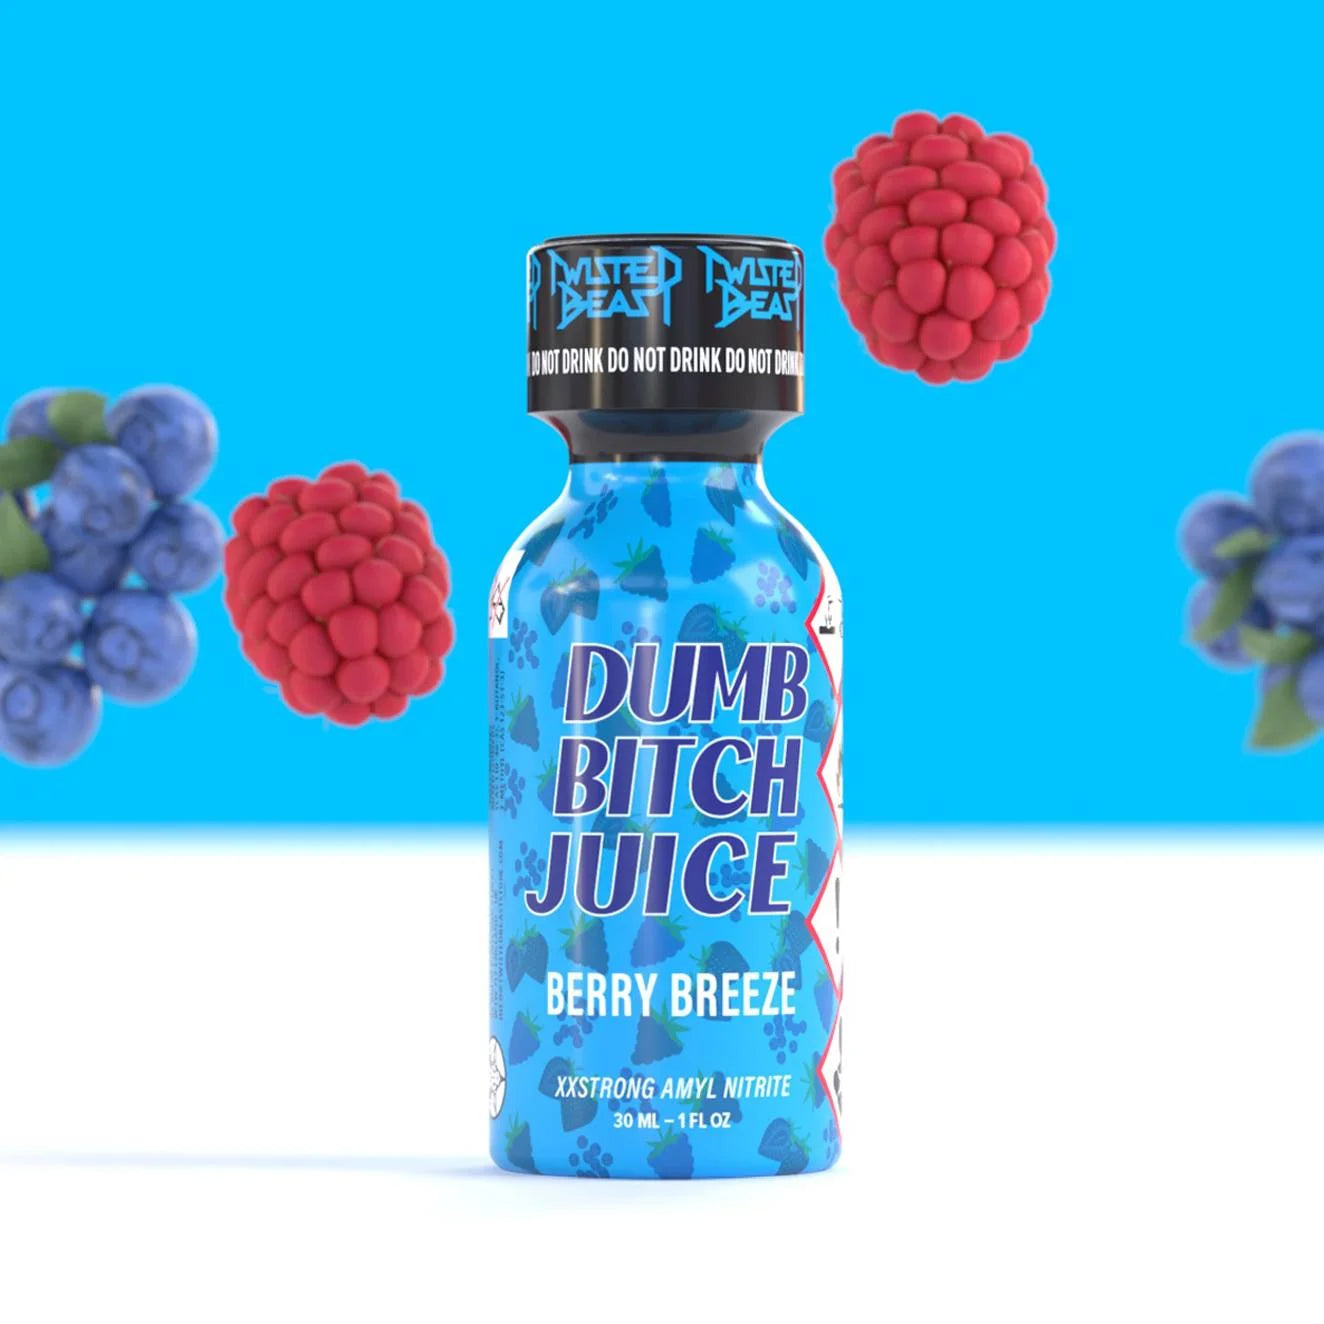 A product photo of a 30ml bottle of Berry Breeze poppers.